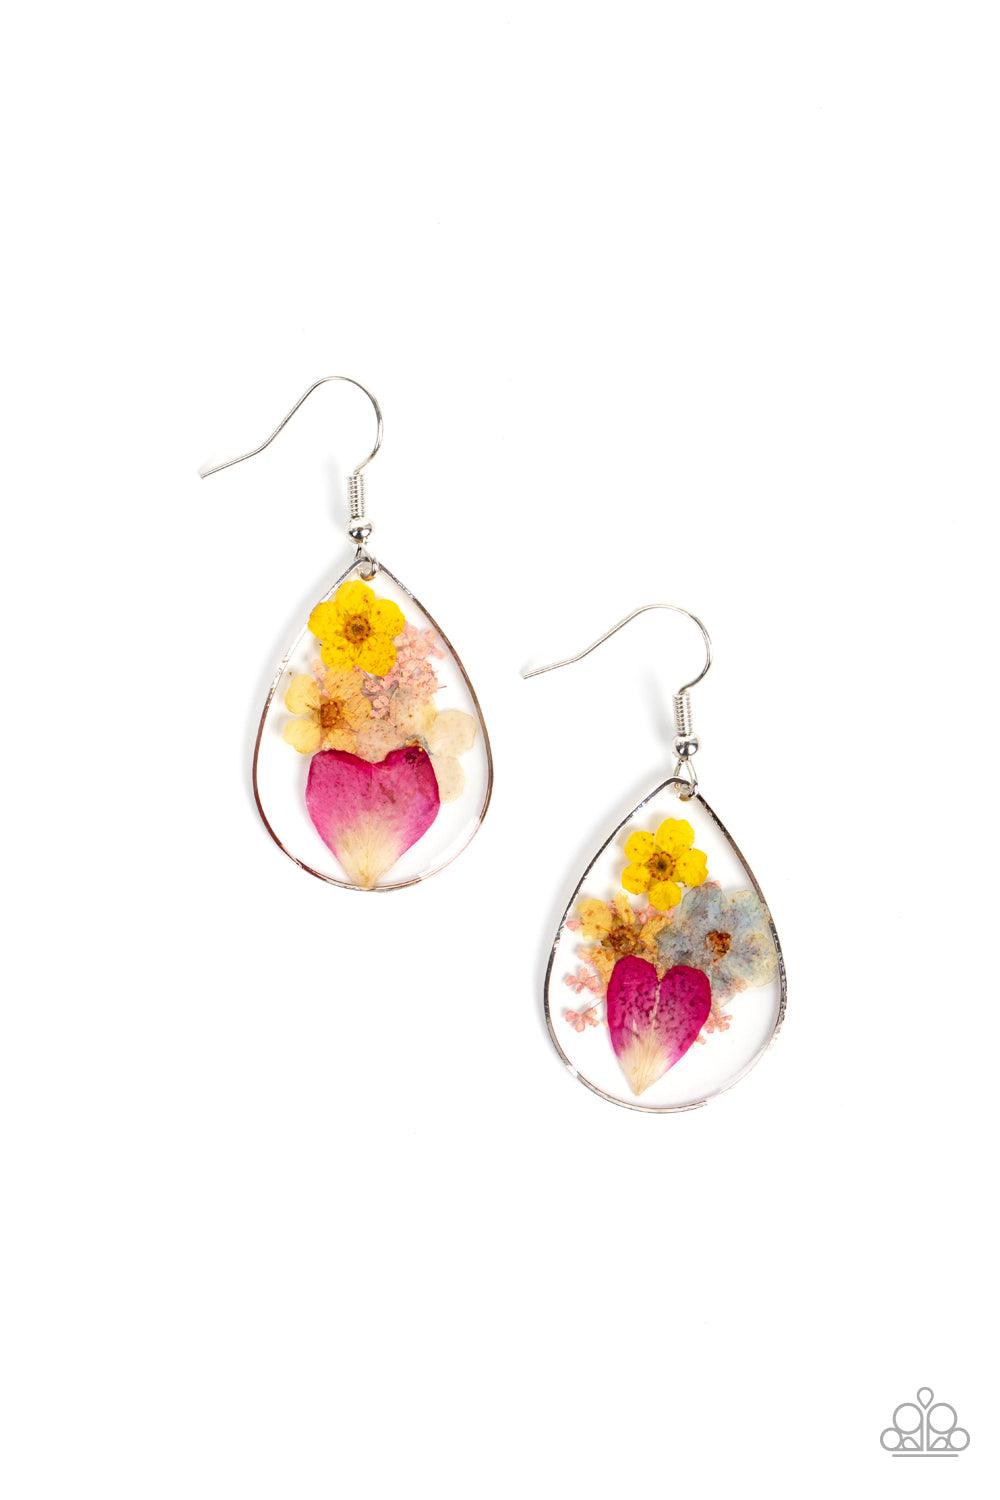 Paparazzi Accessories Prim and PRAIRIE - Multi A colorful collection of wildflowers is encased inside a glassy teardrop casing bordered in silver, creating a whimsical display. Earring attaches to a standard fishhook fitting. Sold as one pair of earrings.